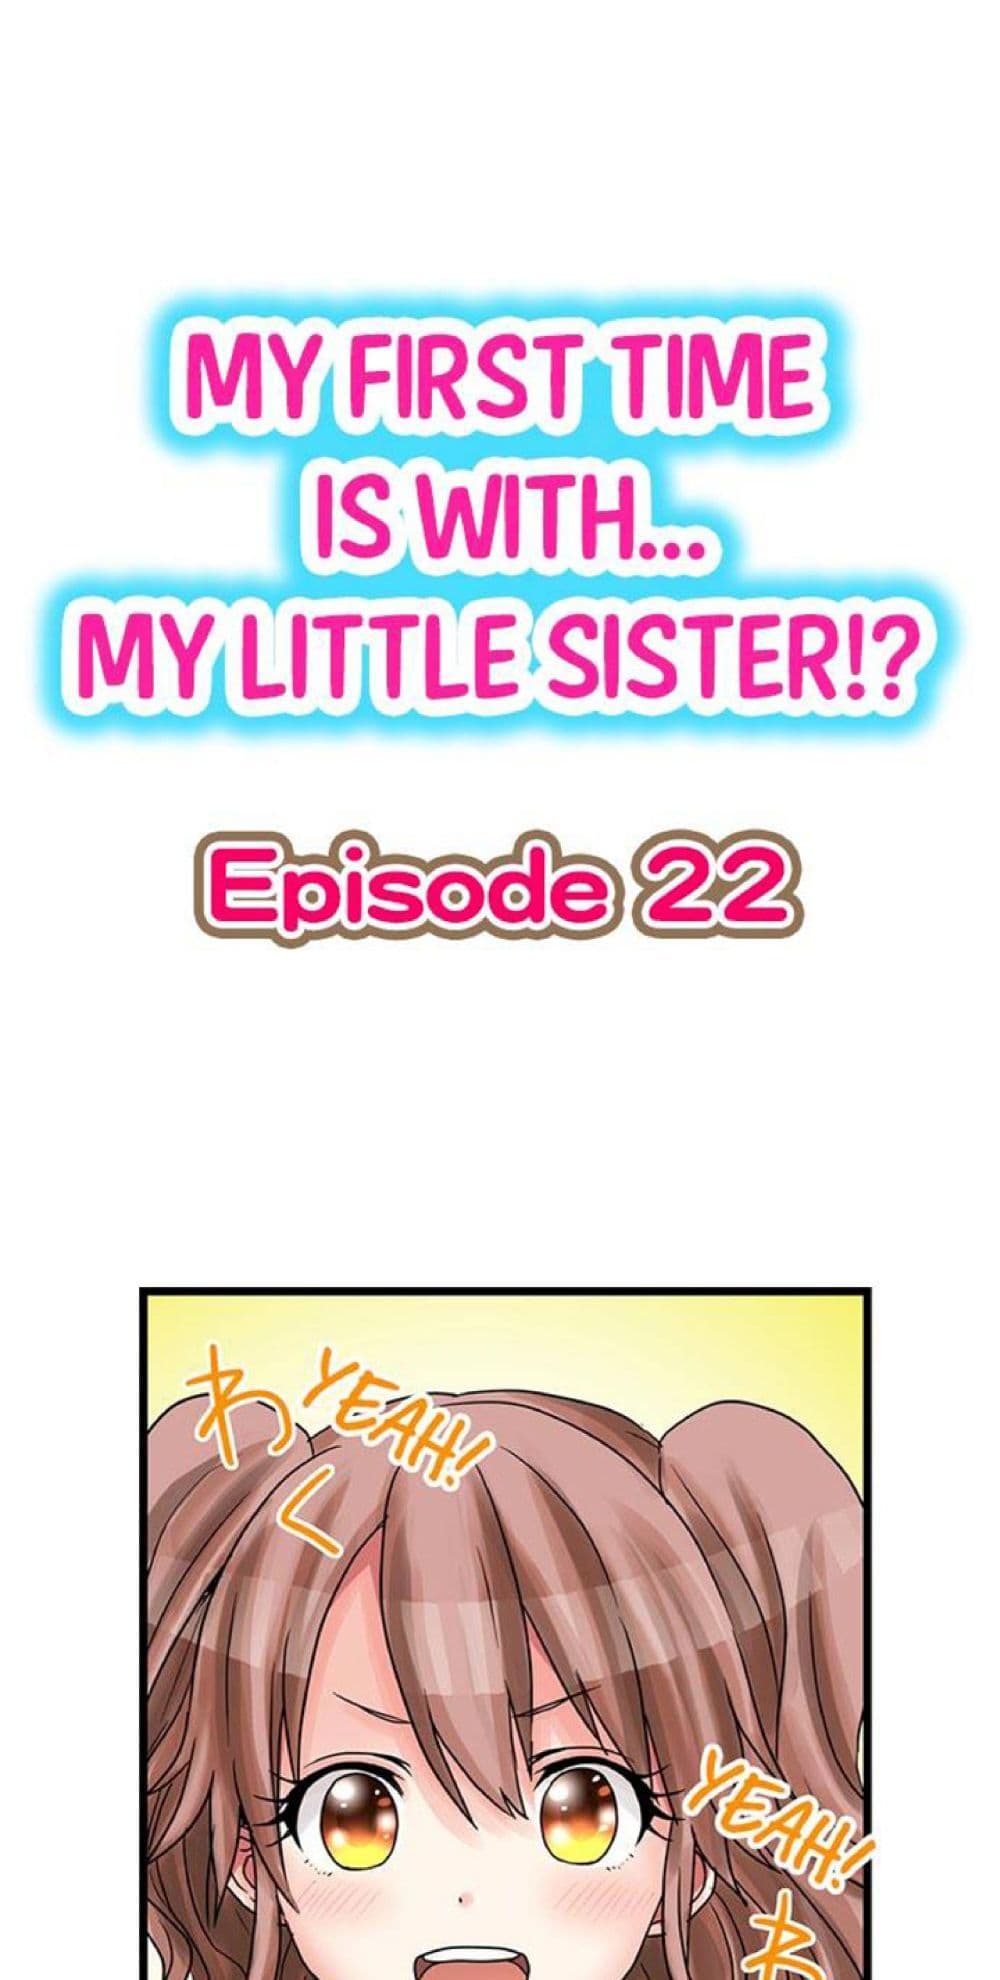 My First Time Is with… My Little Sister!? 22-22